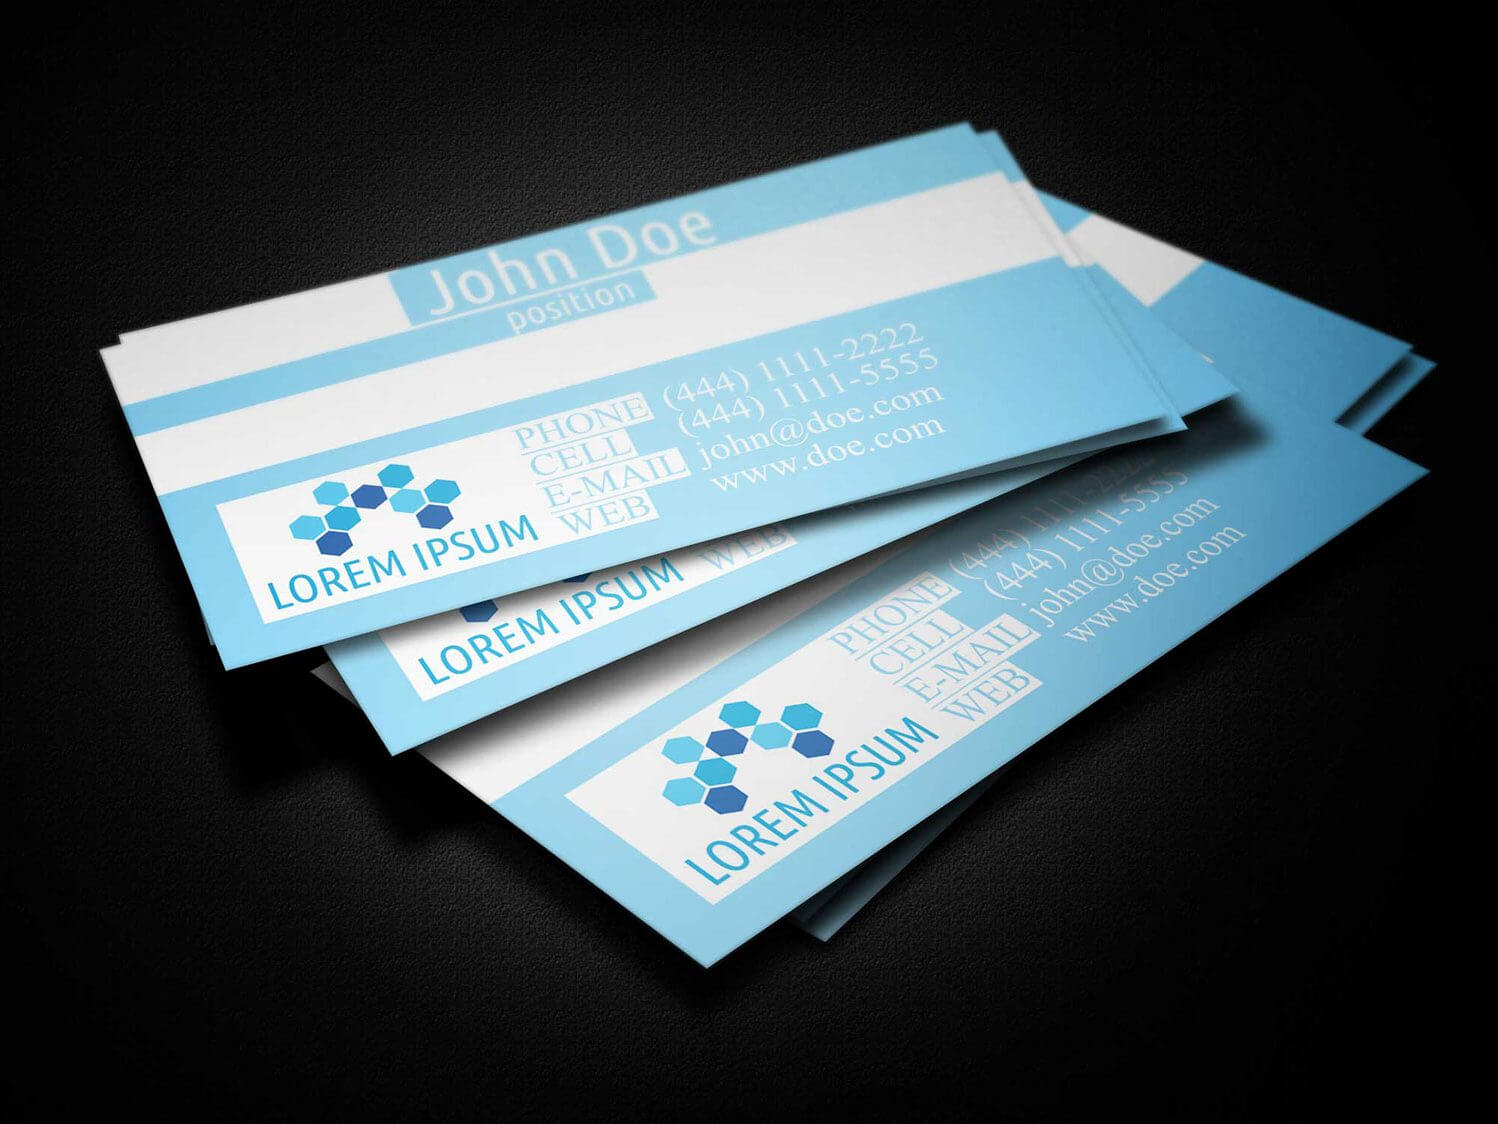 Blue Medical Business Card Template - Business Cards Lab Regarding Medical Business Cards Templates Free